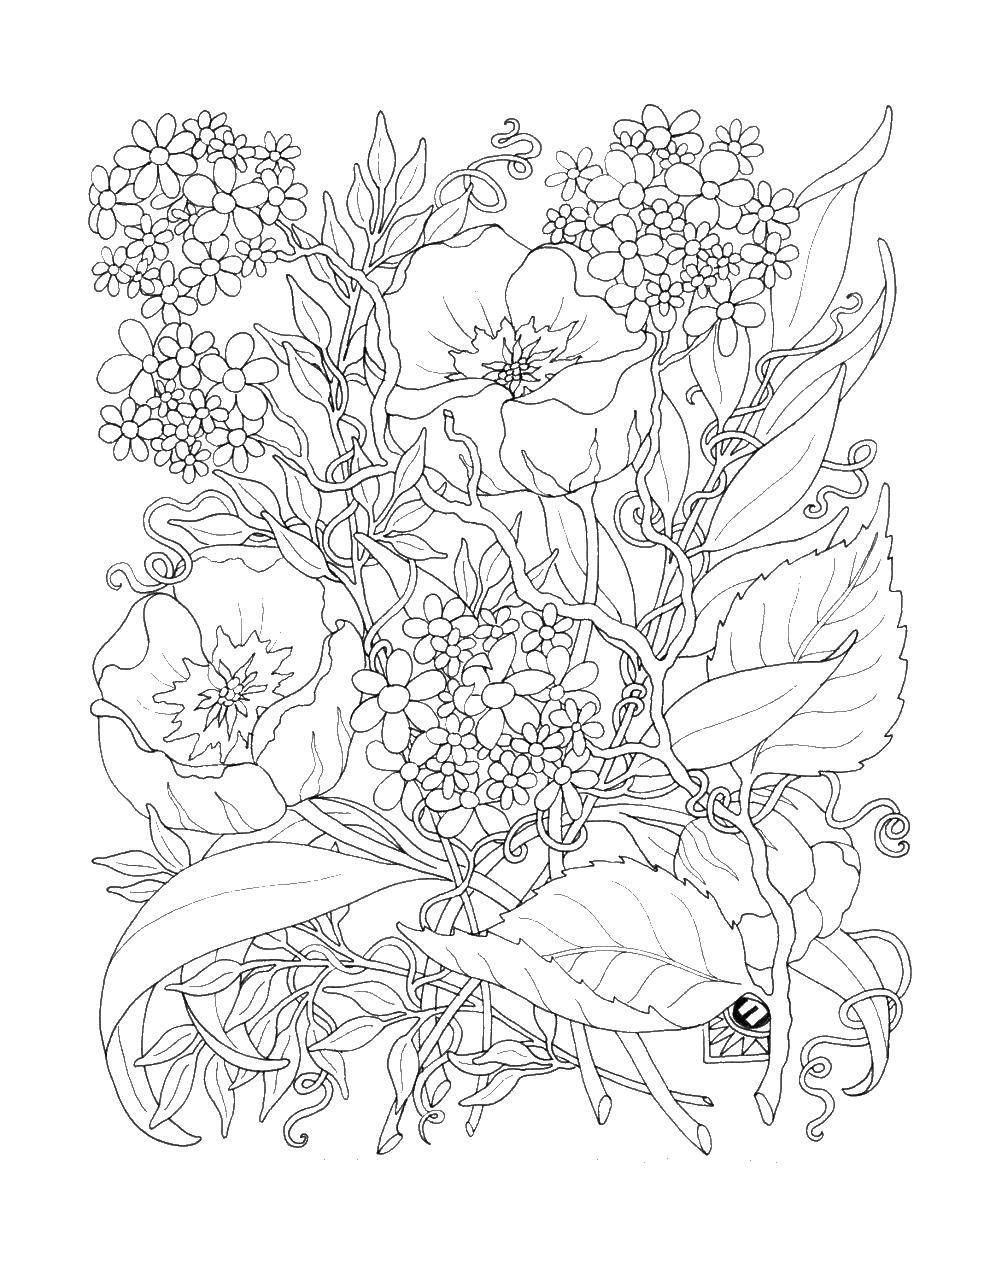 Coloring Floral pattern. Category flowers. Tags:  Flowers.